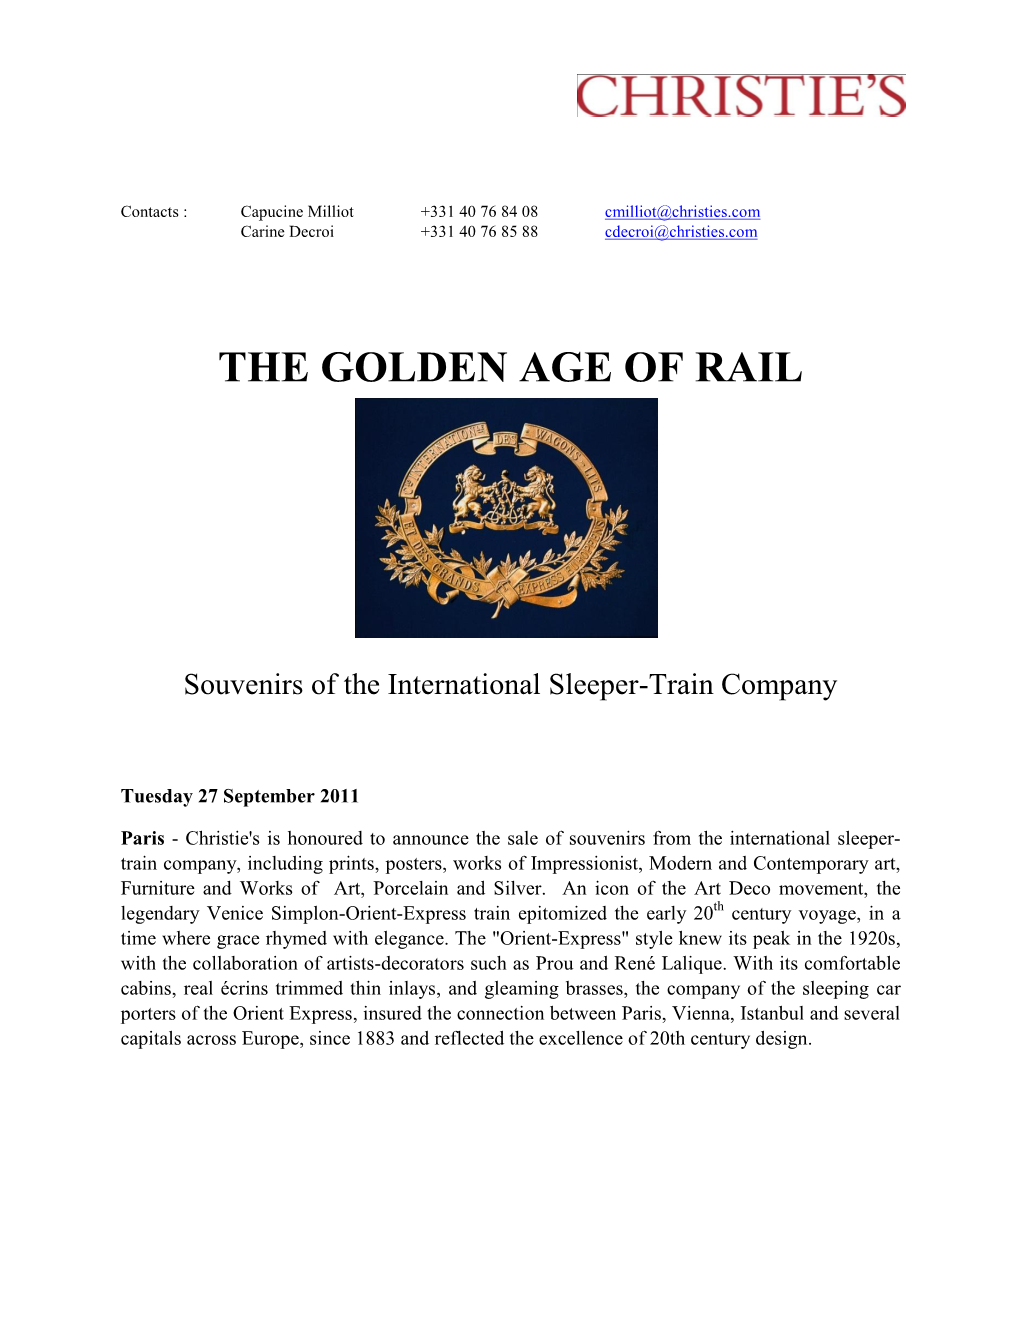 The Golden Age of Rail